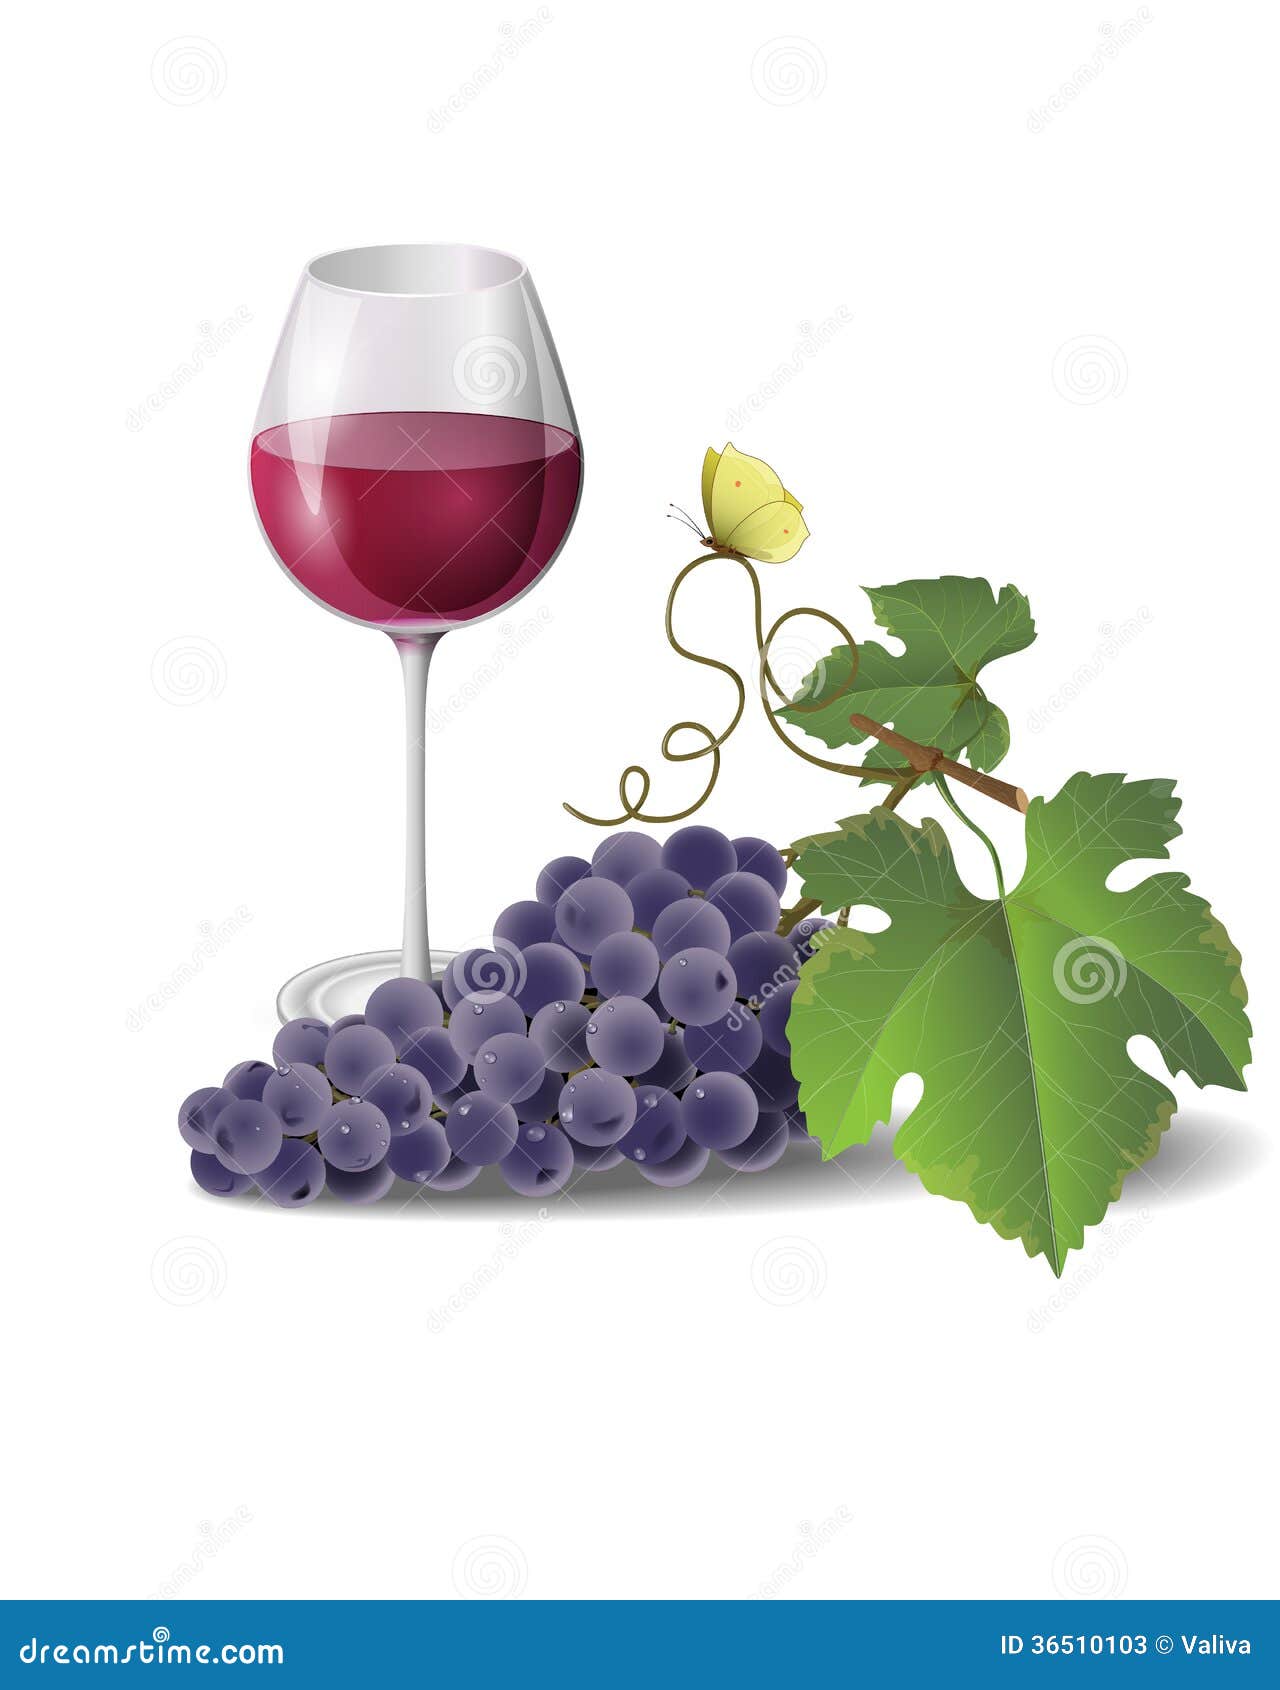 Wine and grapes stock vector. Illustration of fresh, gastronome - 36510103